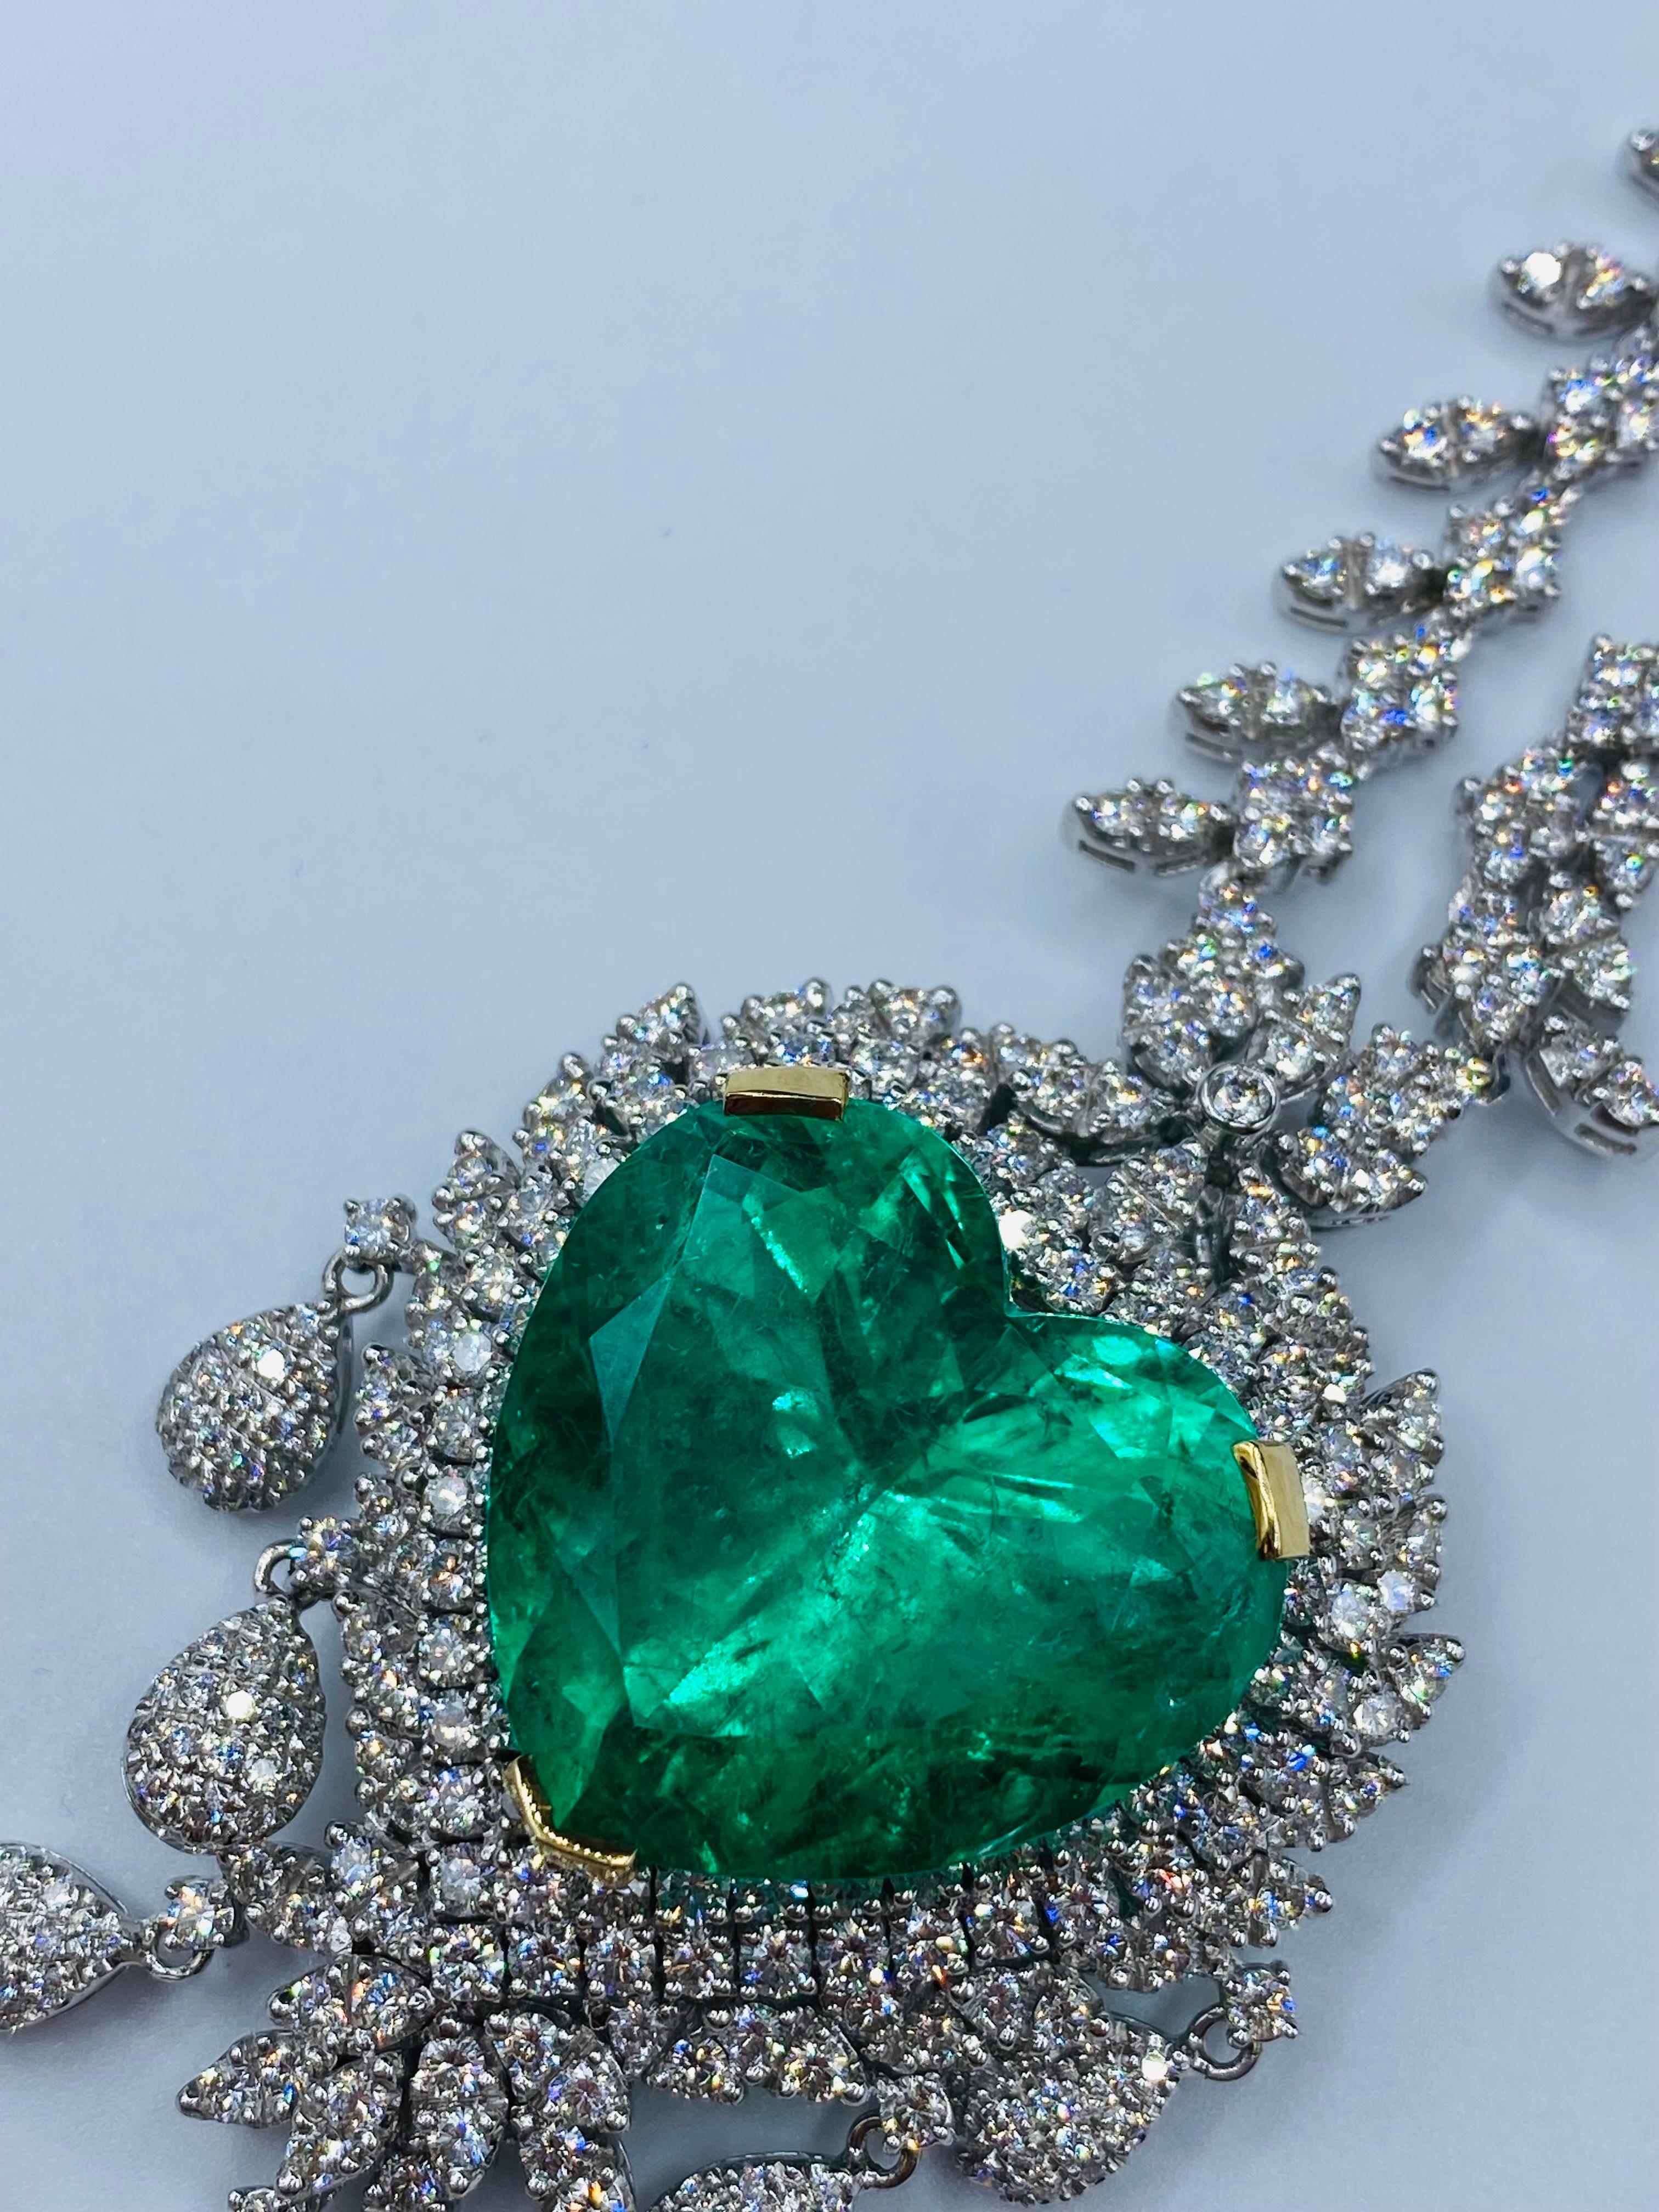 From Emilio Jewelry, a well known and respected wholesaler/dealer located on New York’s iconic Fifth Avenue,
Colombian Emeralds of this quality are hard to come by, especially in a heart shape of this quality and size! The focal point of this